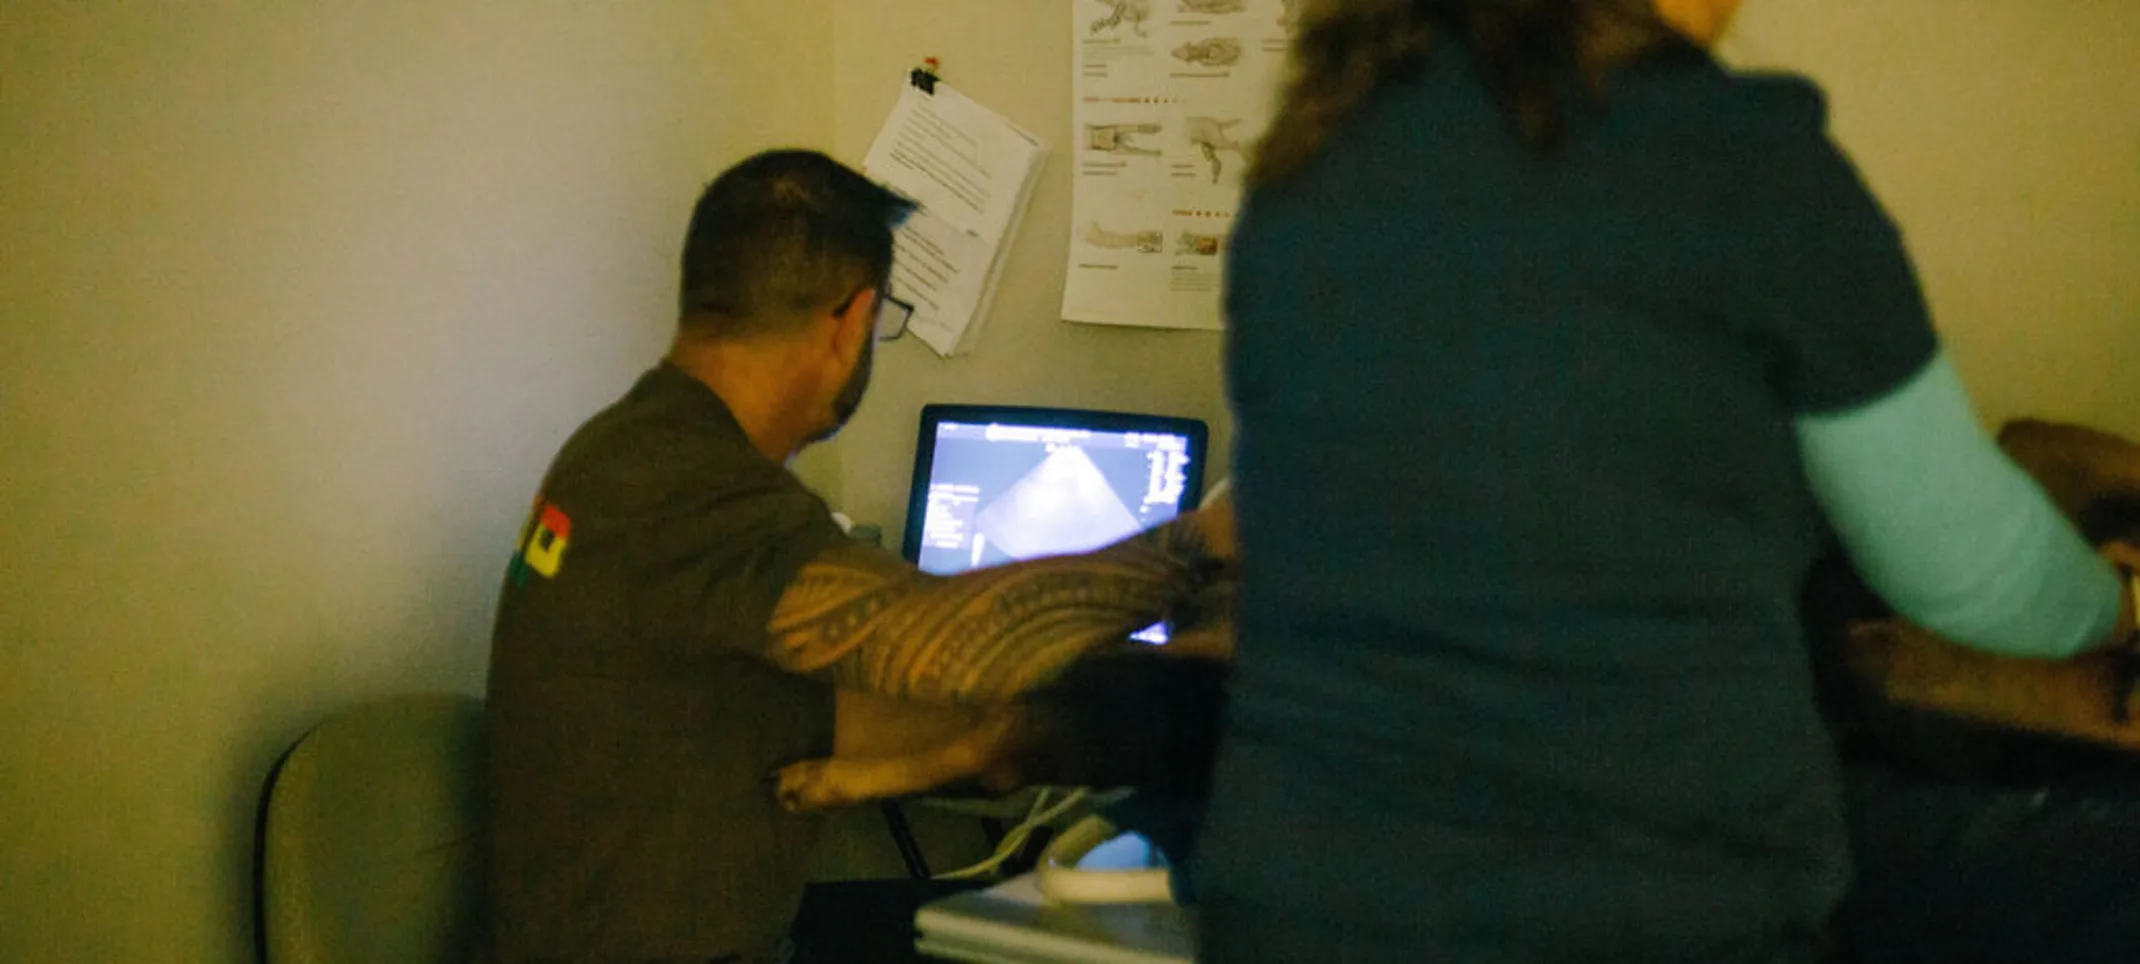 staff looking at an ultrasound